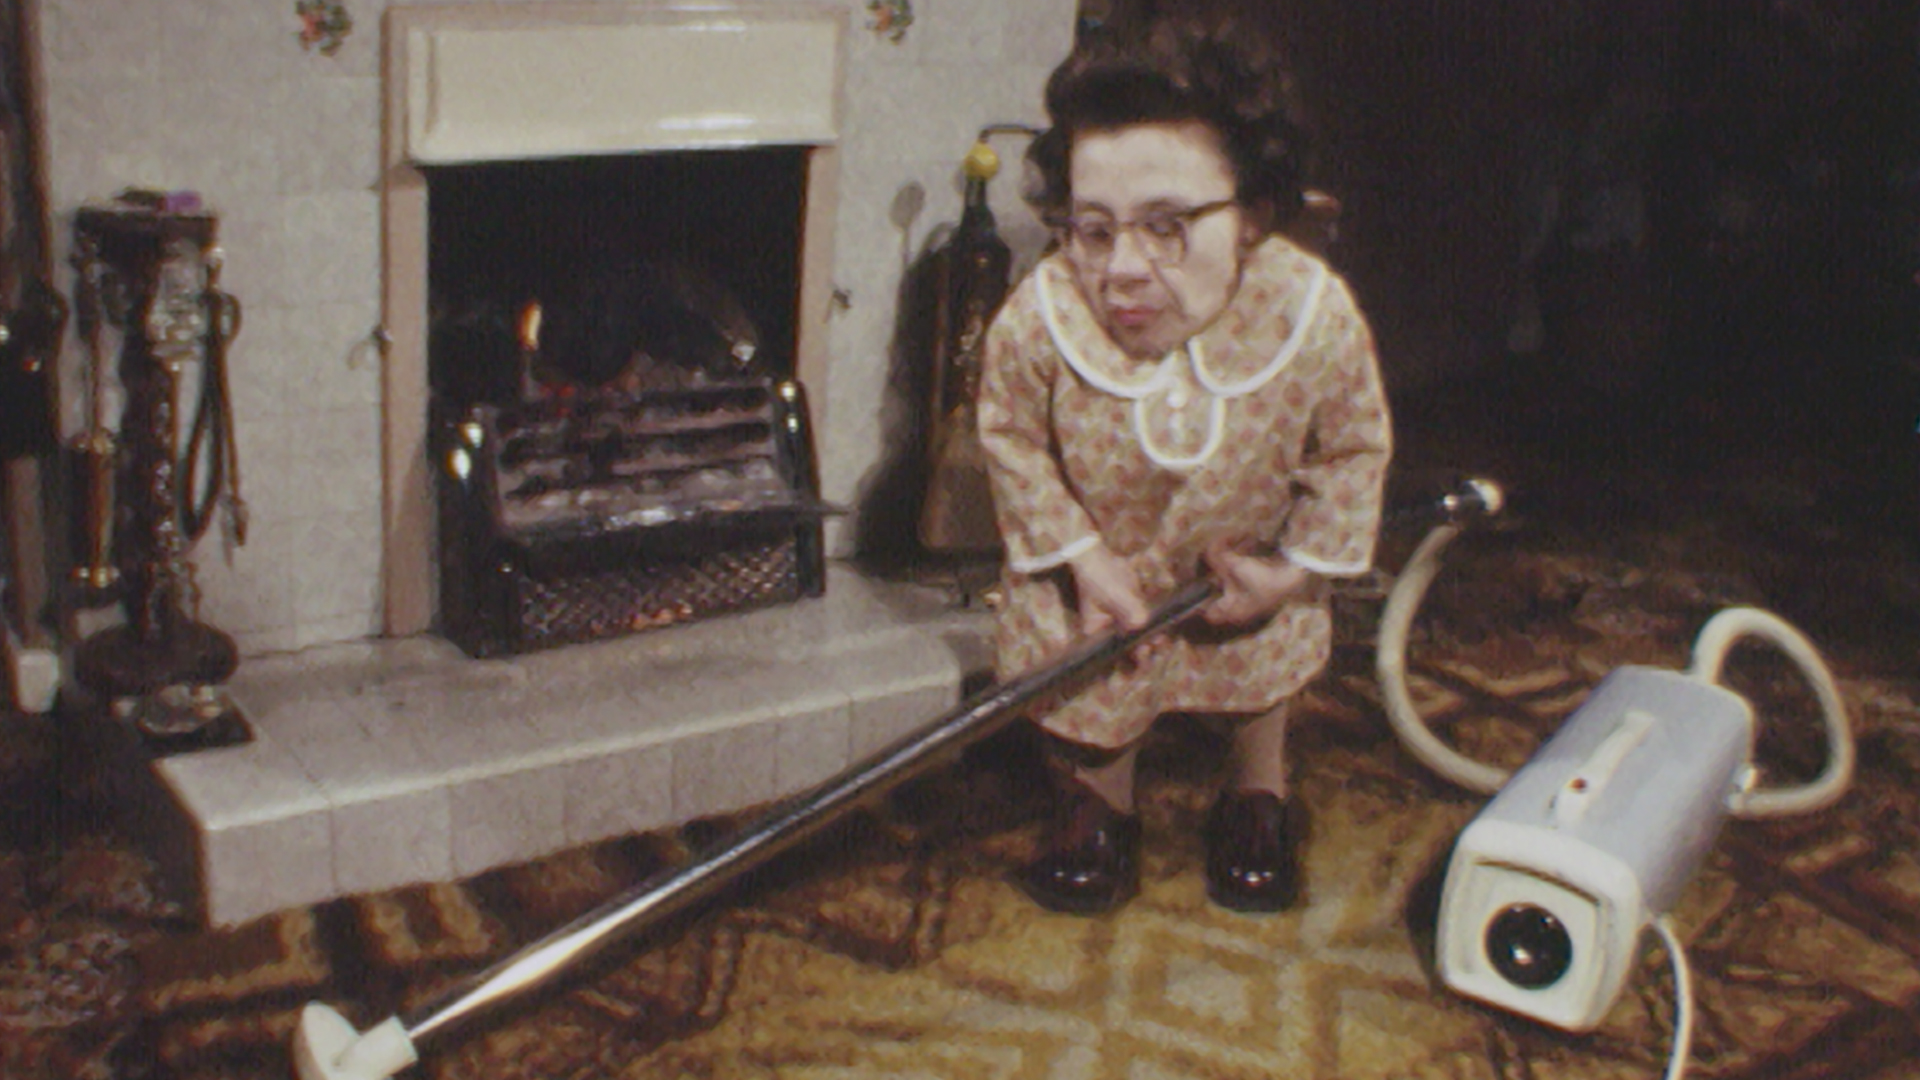 Worlds Smallest Female Porn Star - Watch Smallest Woman in the World online - BFI Player